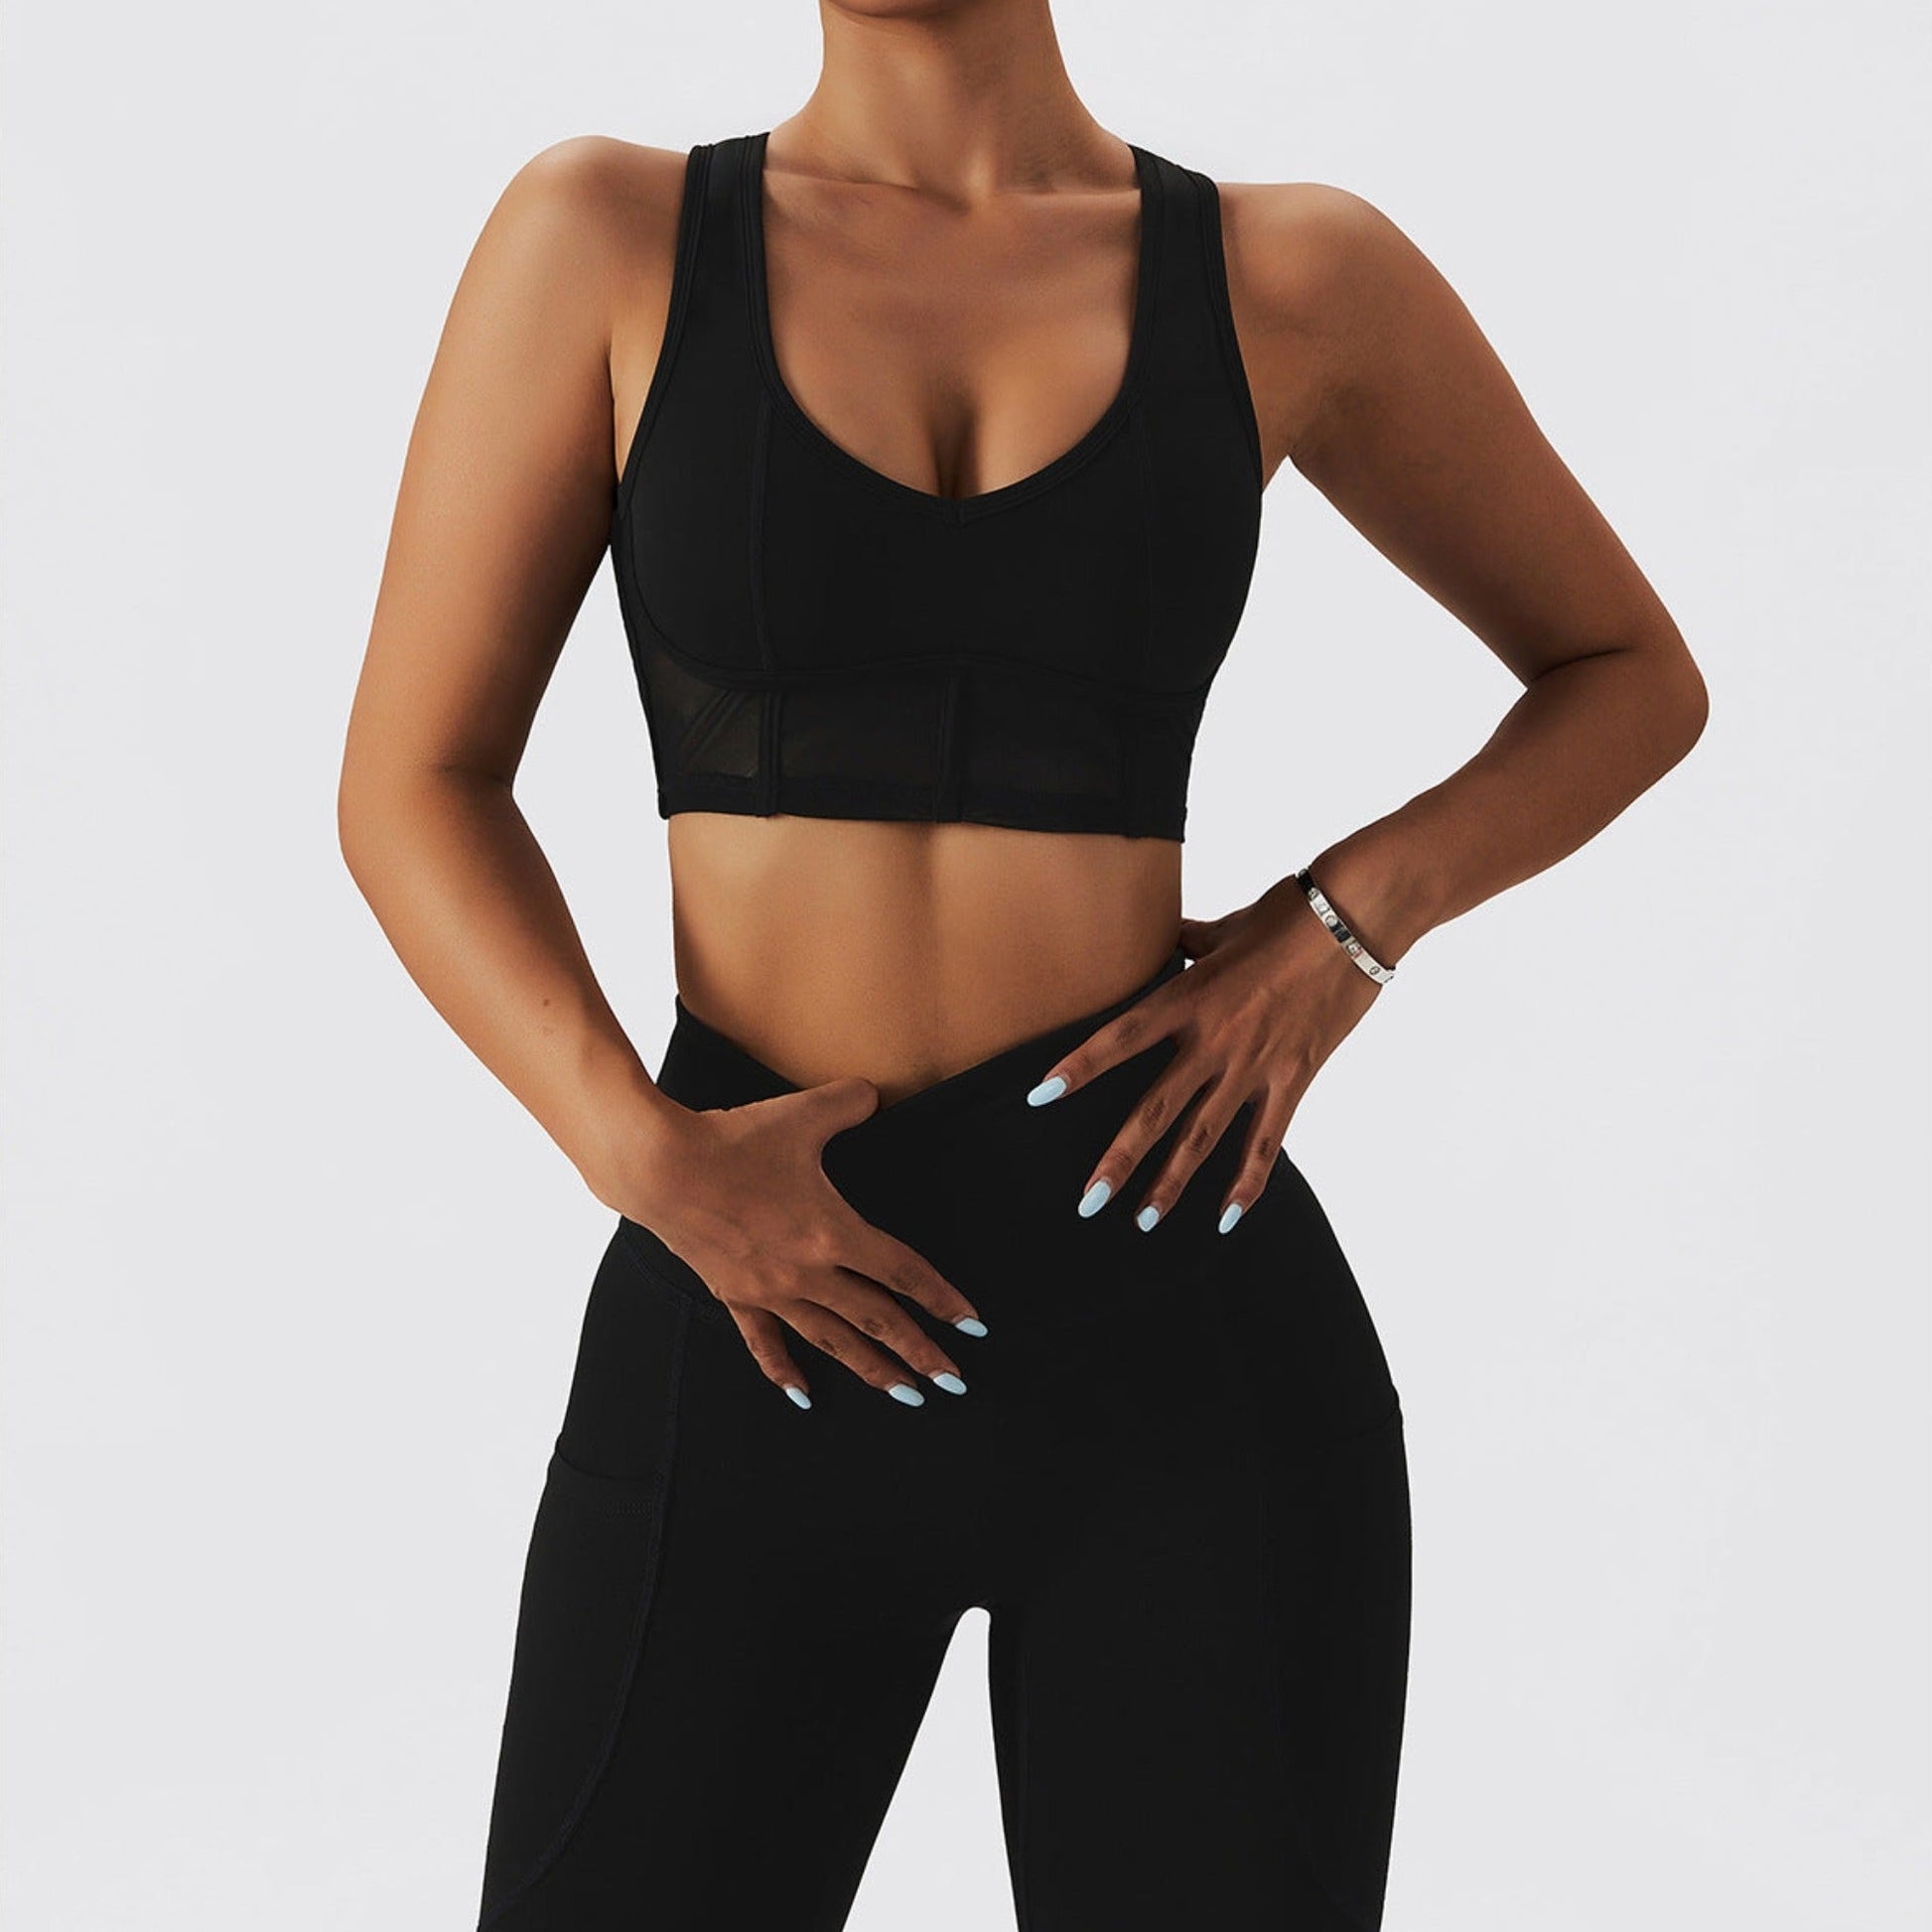 Fitness model wearing a sexy, contouring, black matching set from Vibras Activewear.